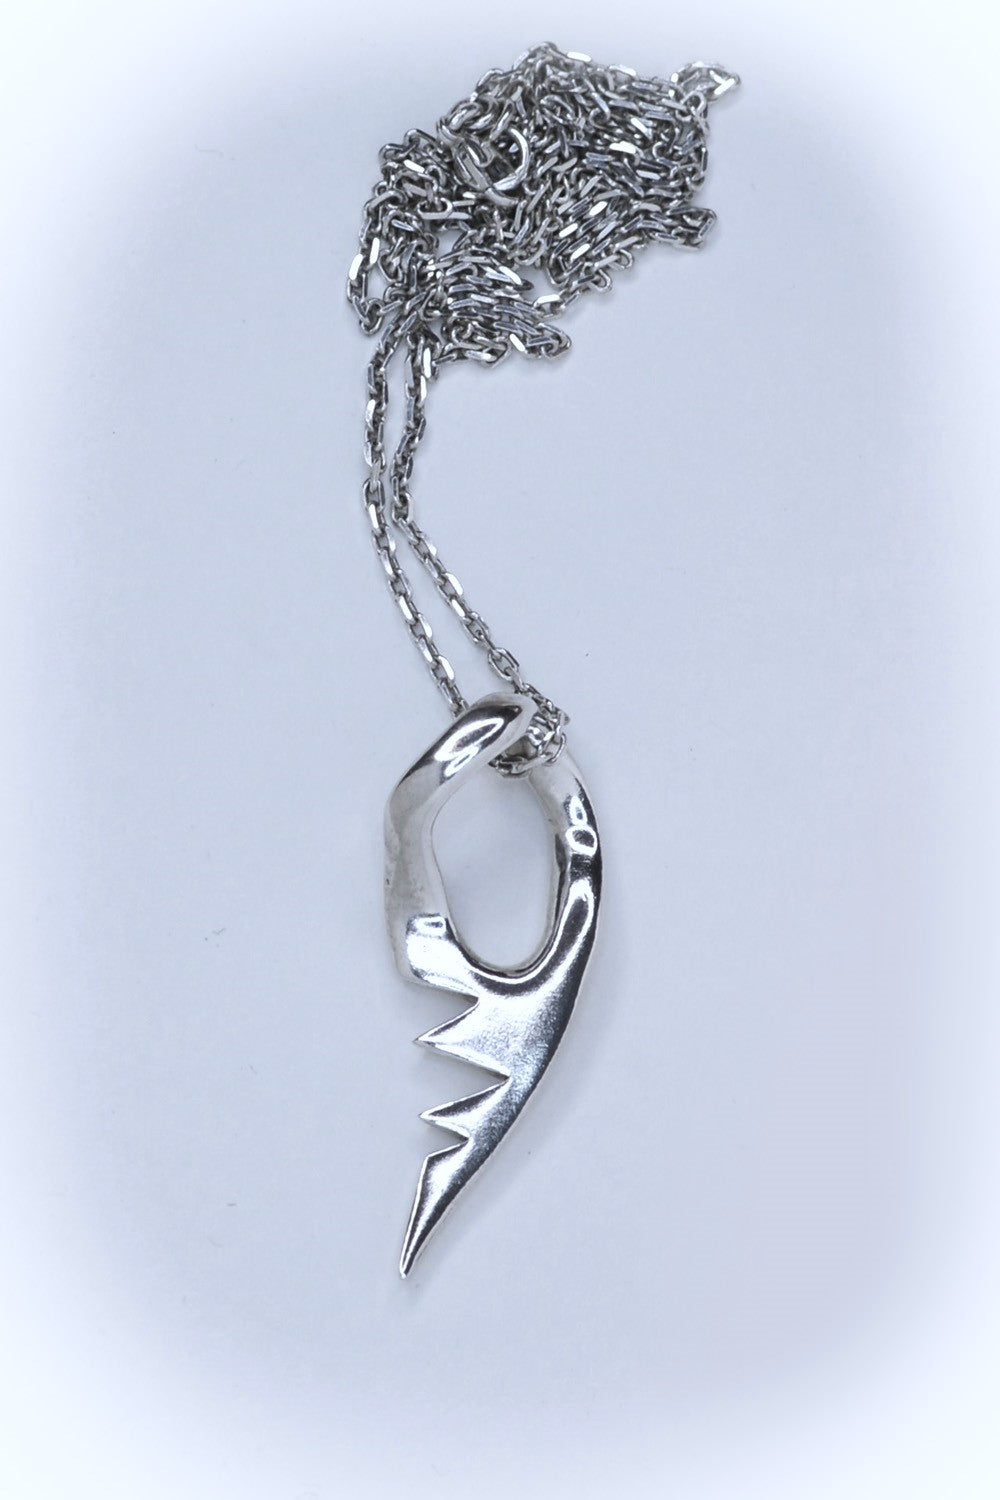 Jagged blade silver pendant necklace by Annika Burman